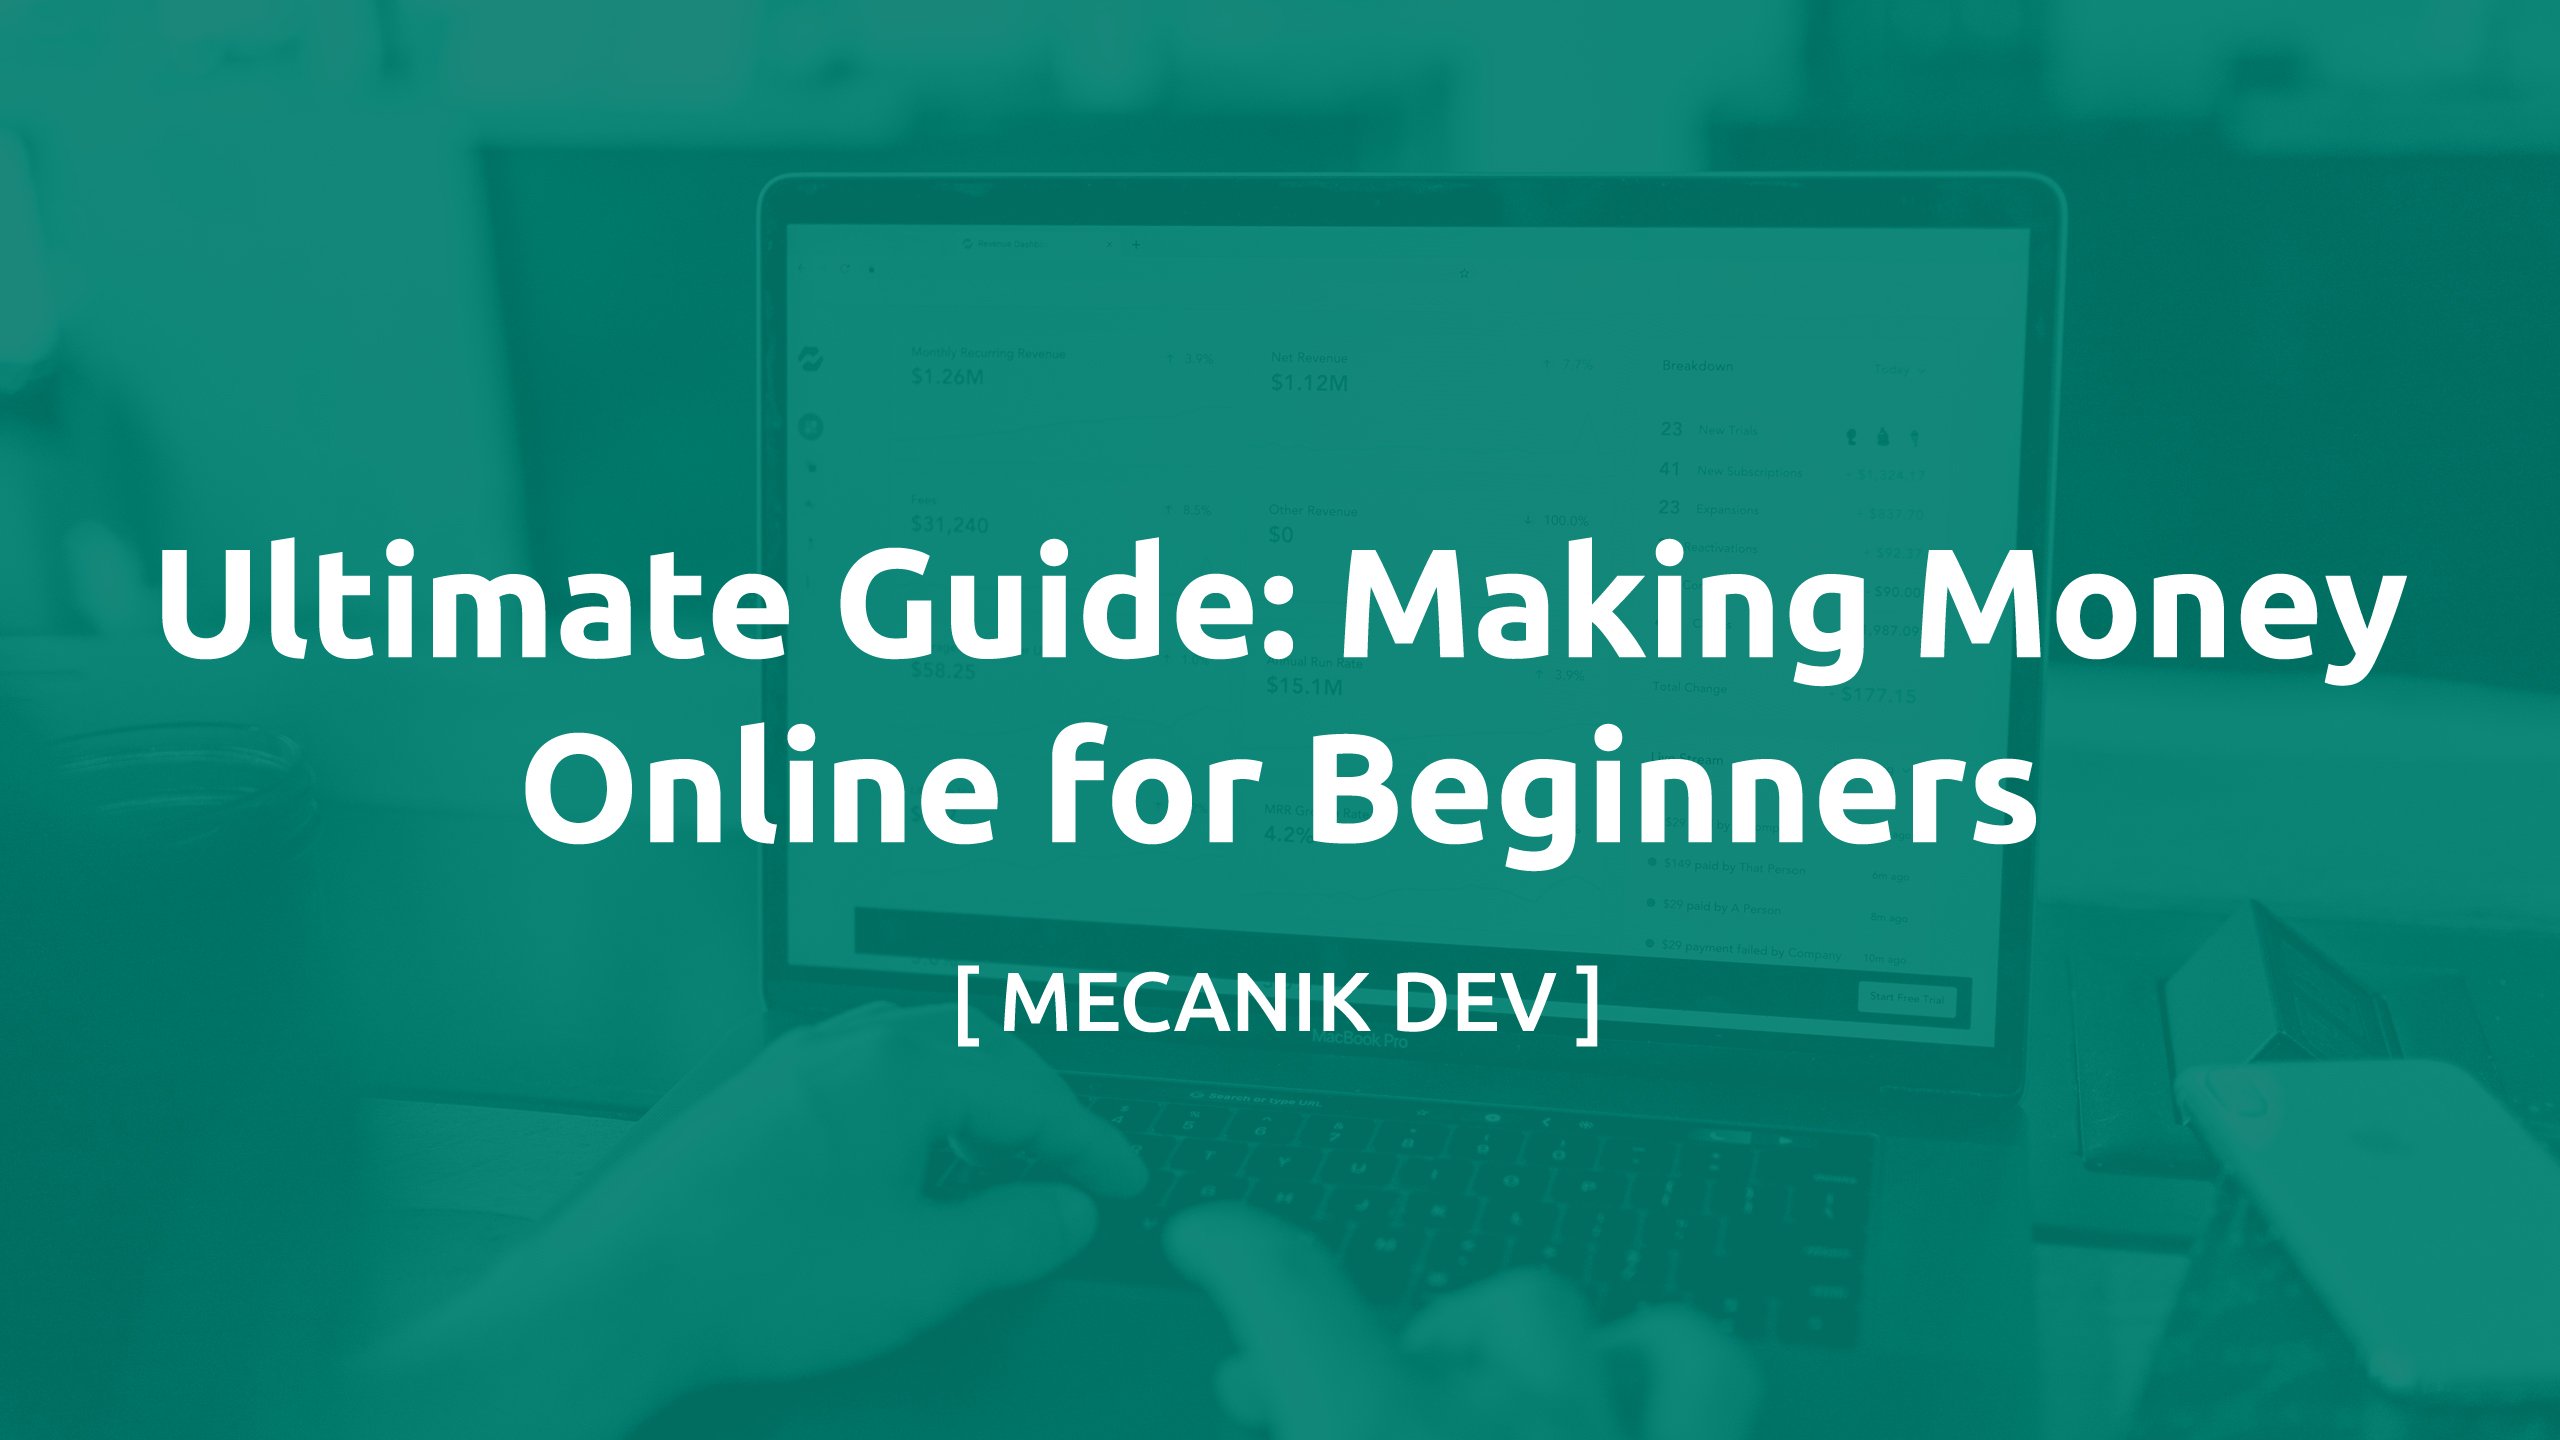 Ultimate Guide: Making Money Online for Beginners